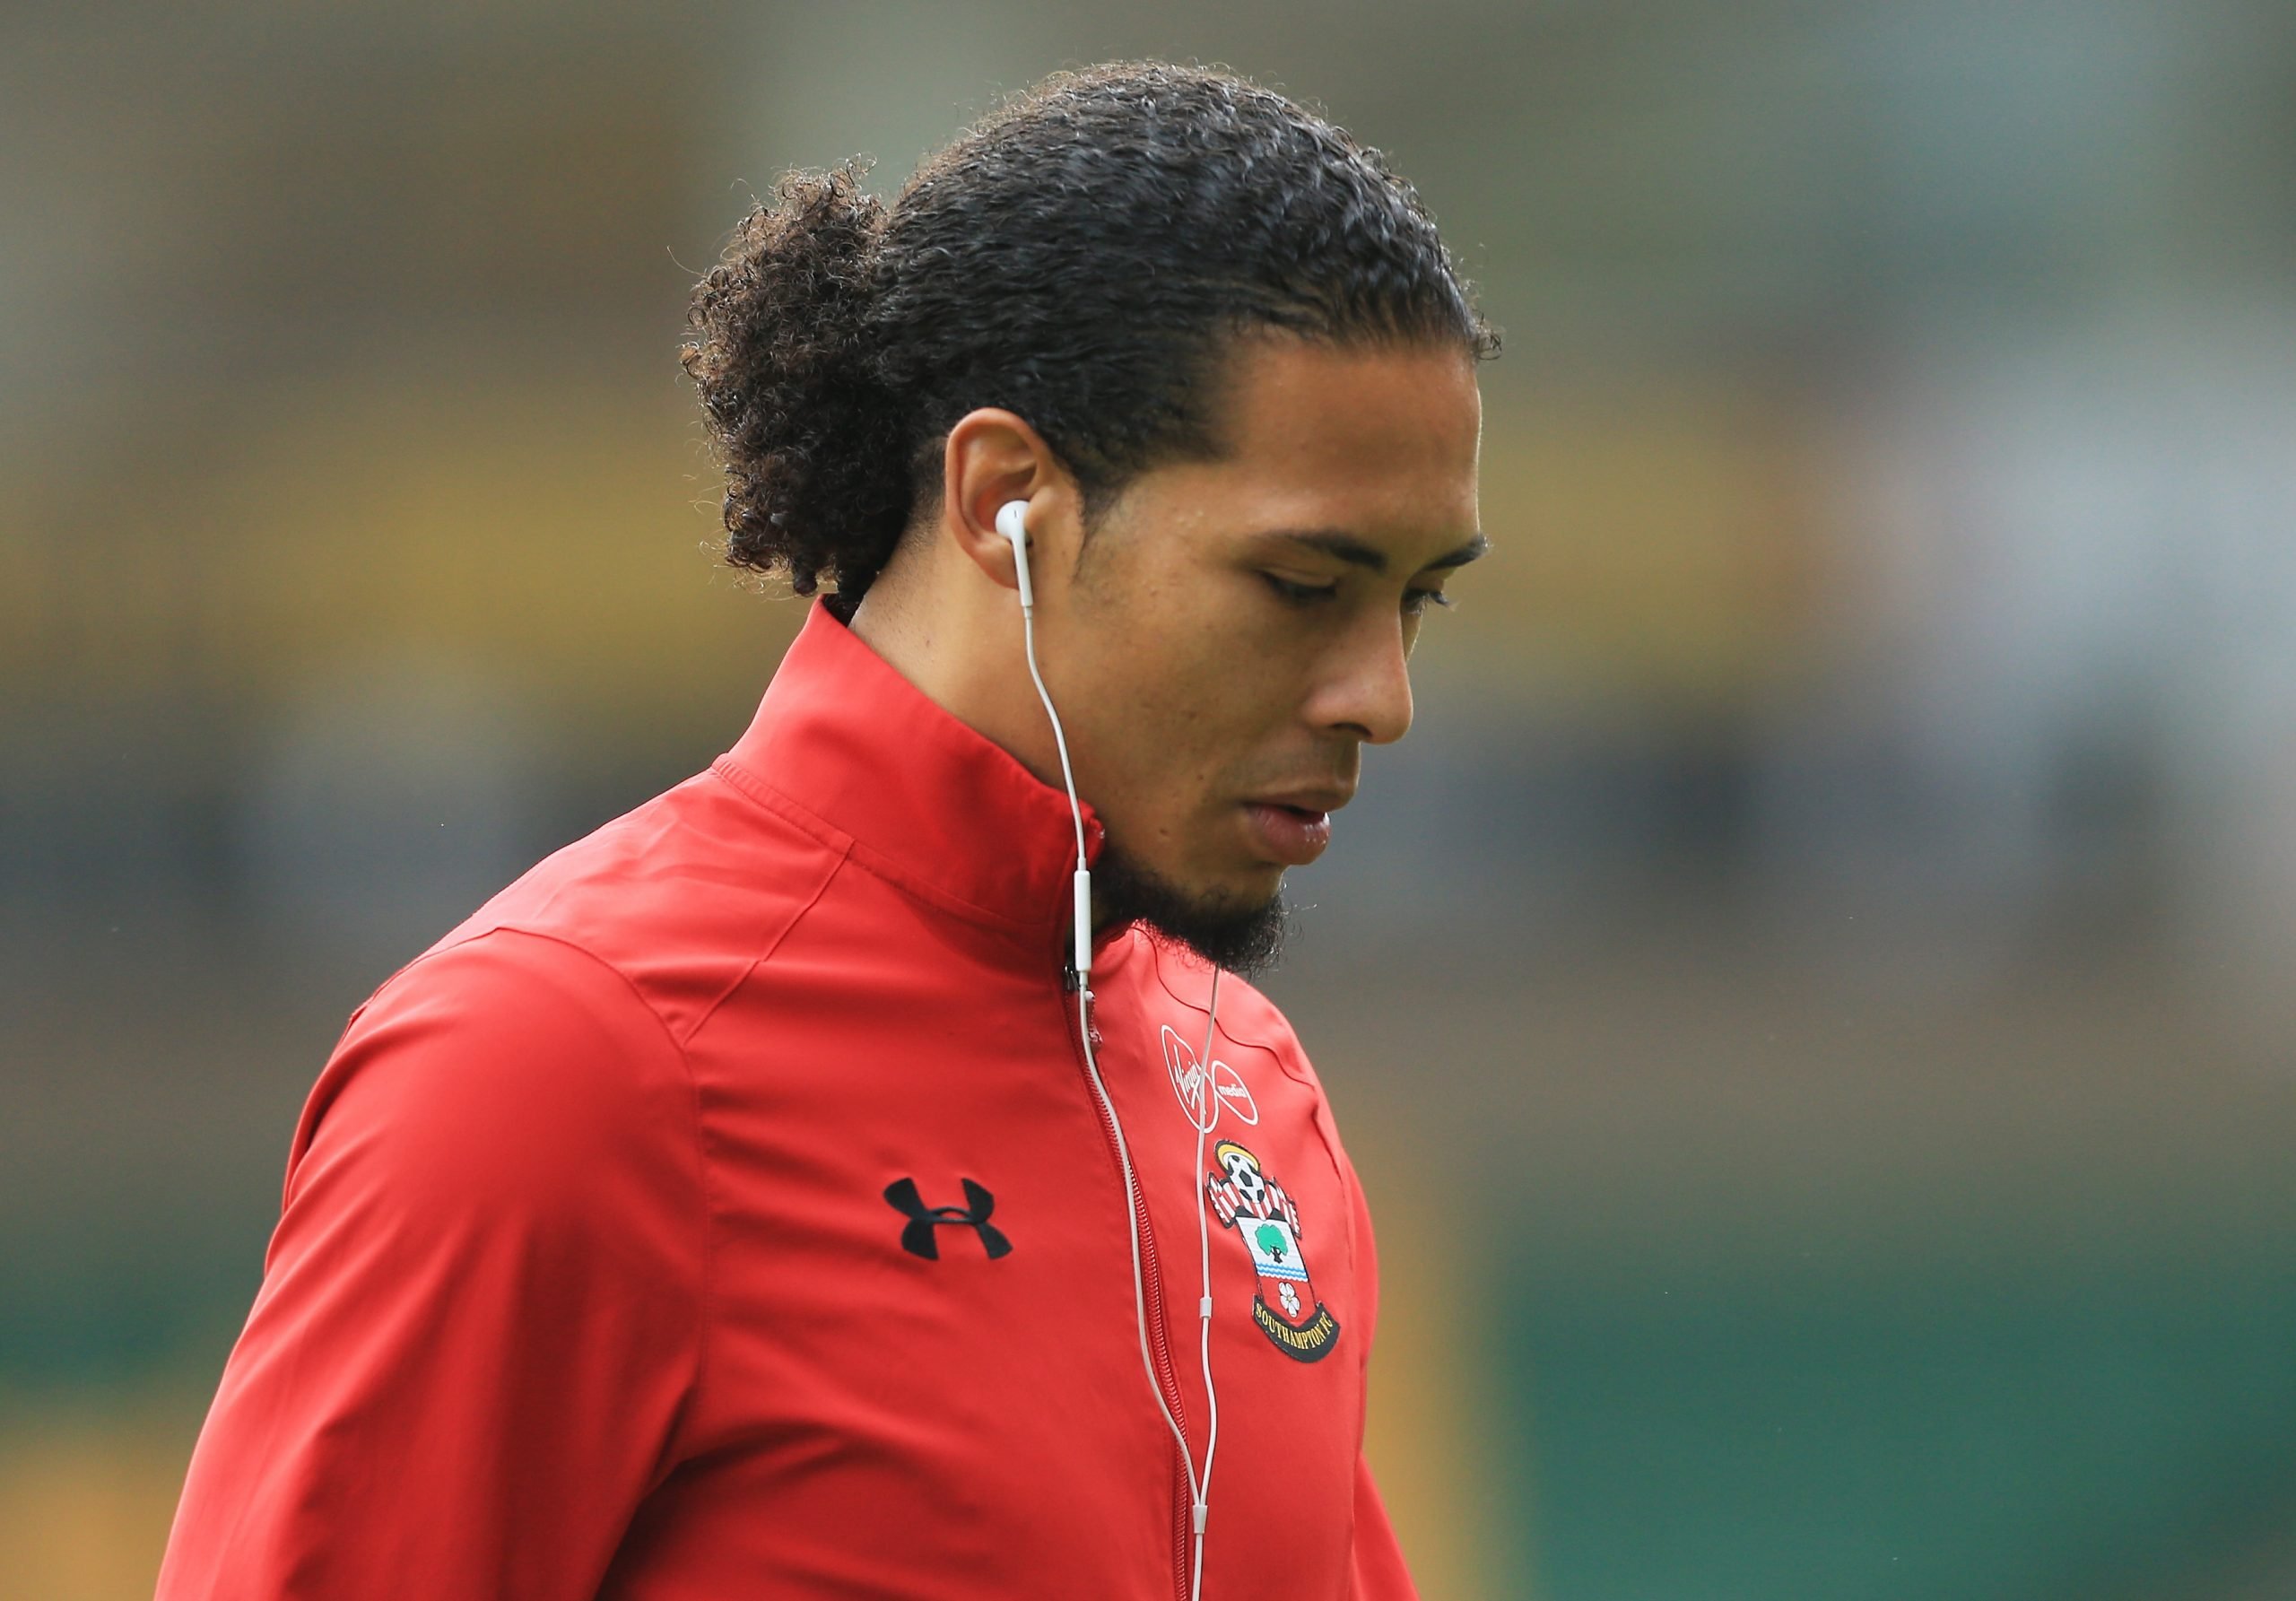 NORWICH, ENGLAND - JANUARY 07:  Virgil van Dijk of Southampton looks on during the Emirates FA Cup Third Round match between Norwich City and Southampton at Carrow Road on January 7, 2017 in Norwich, England.  (Photo by Stephen Pond/Getty Images)